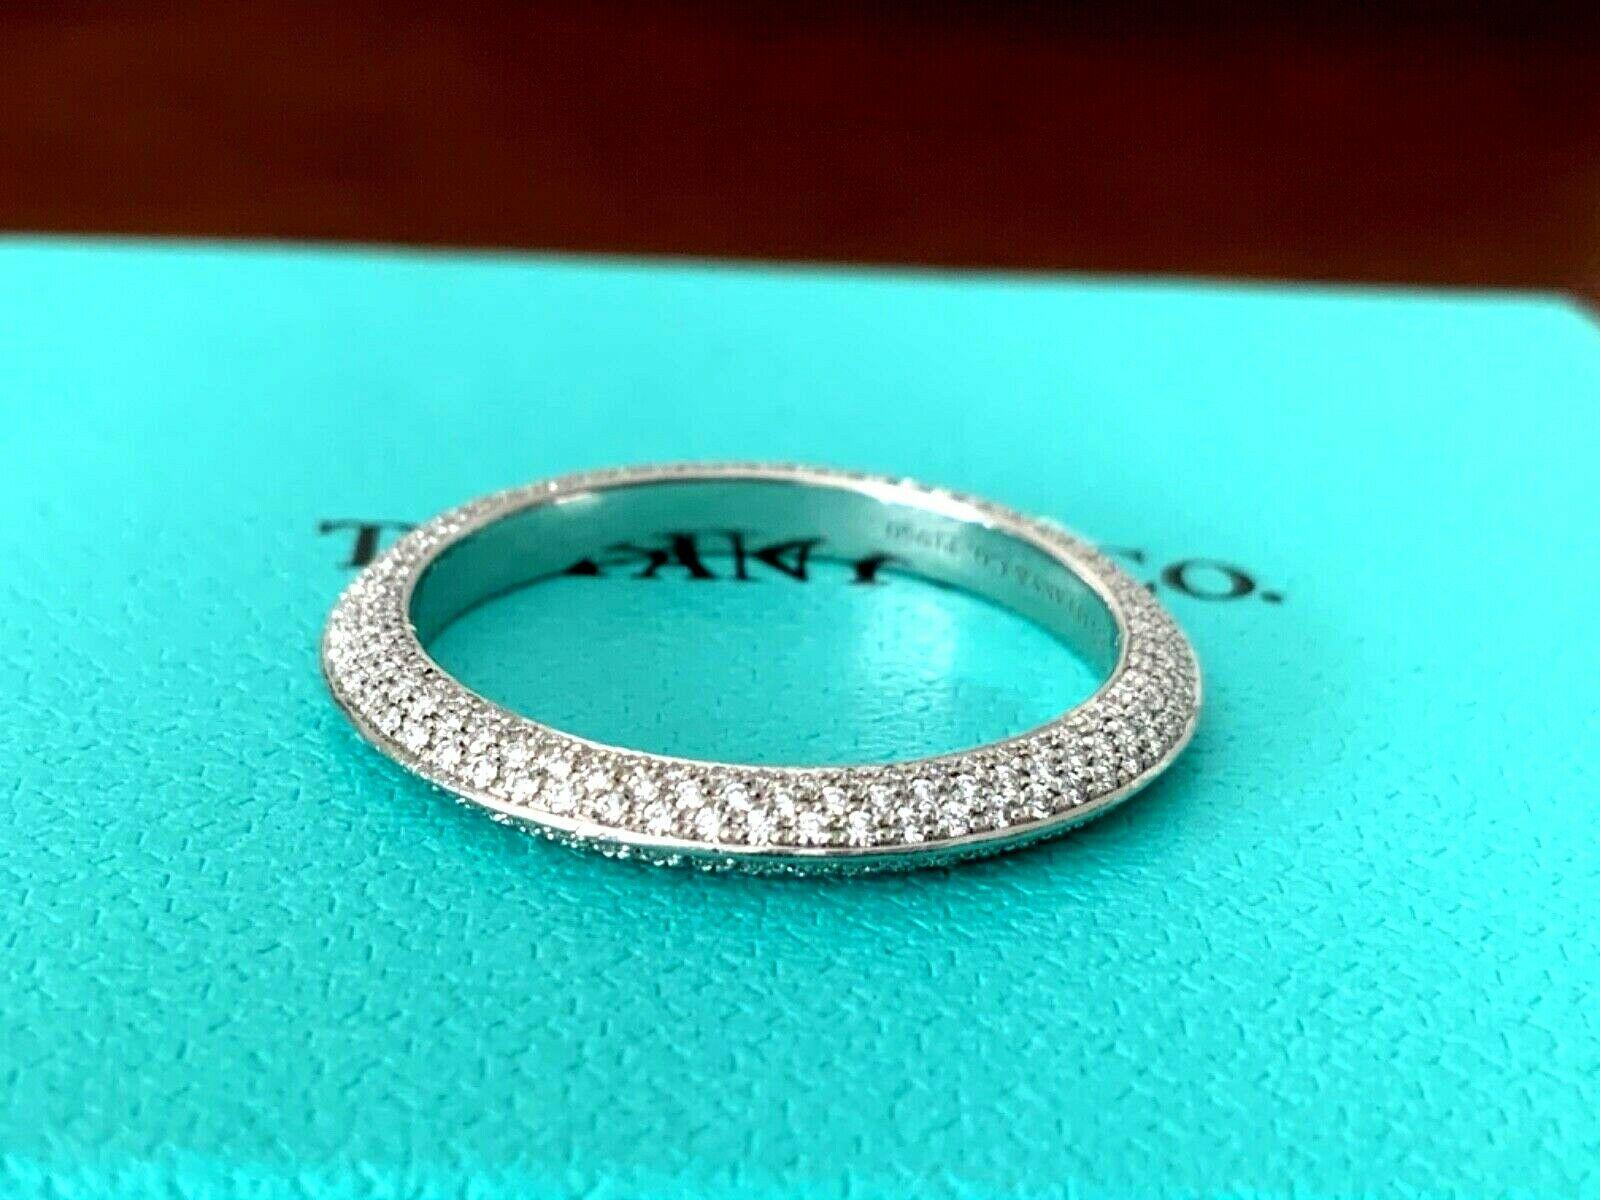 Tiffany & Co. Platinum Pave Diamond Wedding Band Ring with Papers 2019 In New Condition For Sale In Middletown, DE